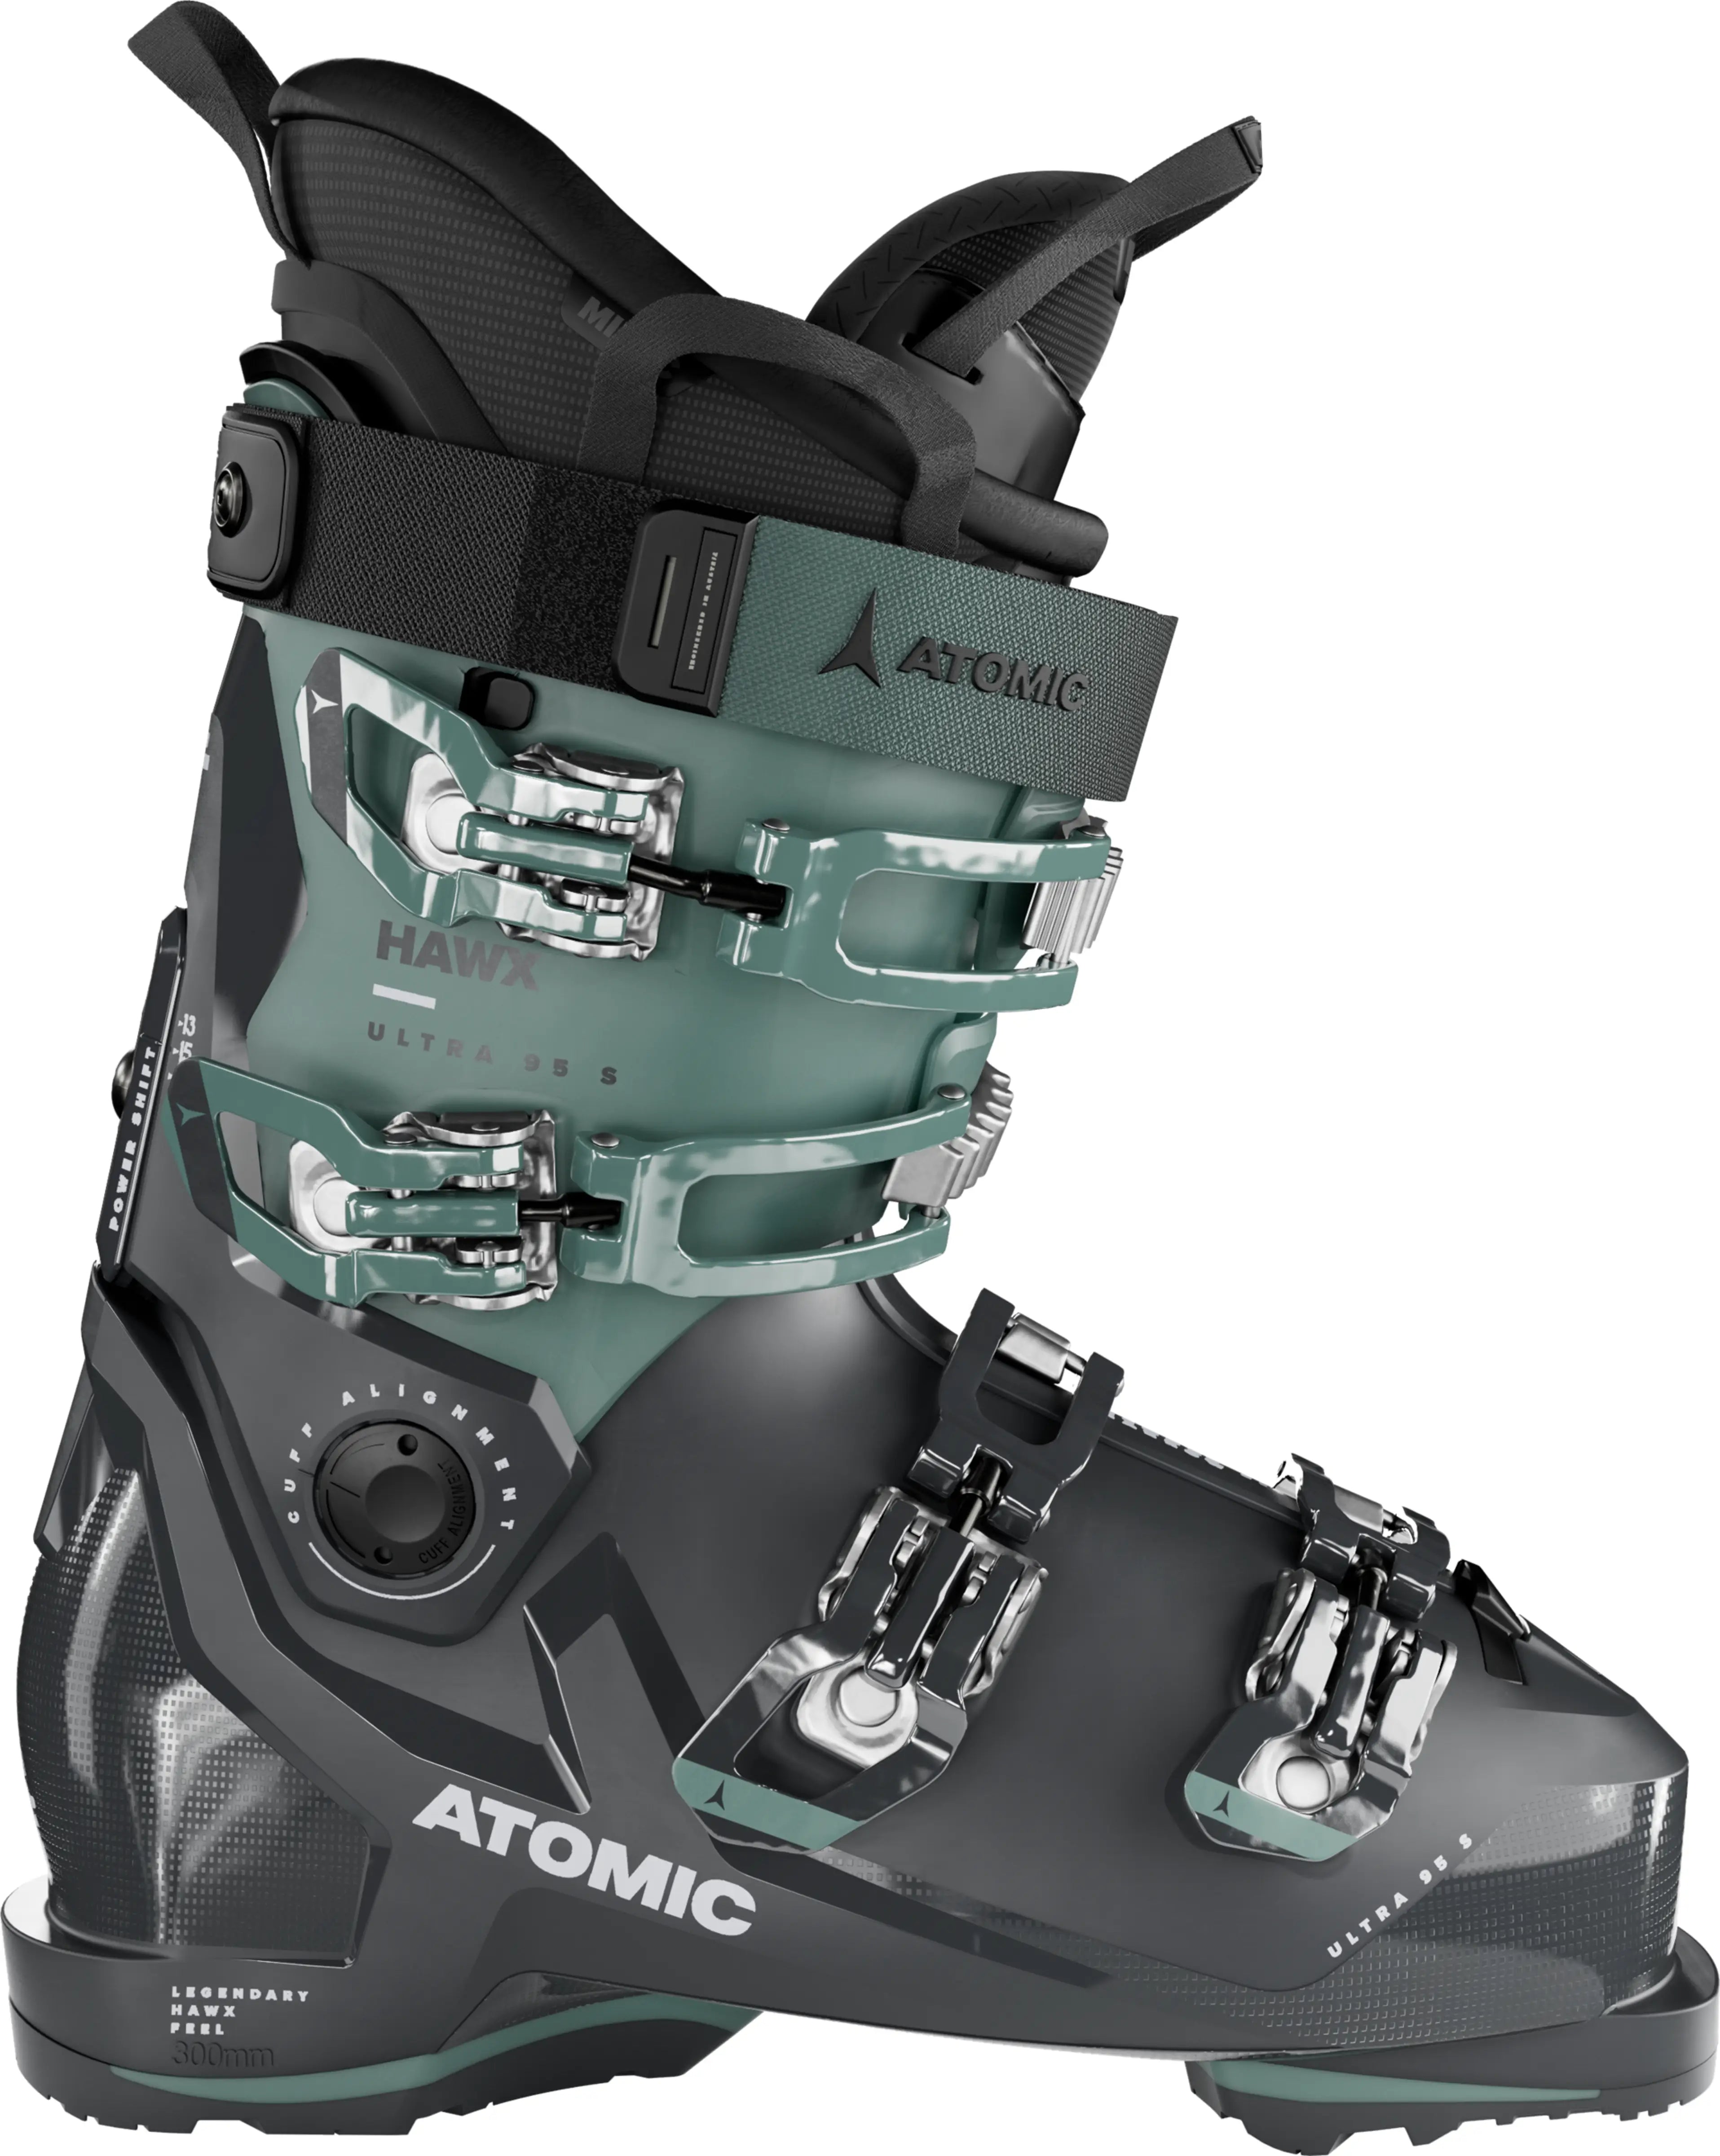 The Atomic Hawx Ultra 95 S W GW is a strong all-mountain ski boot with a medium flex and narrow fit – perfect for female skiers with a medium build.